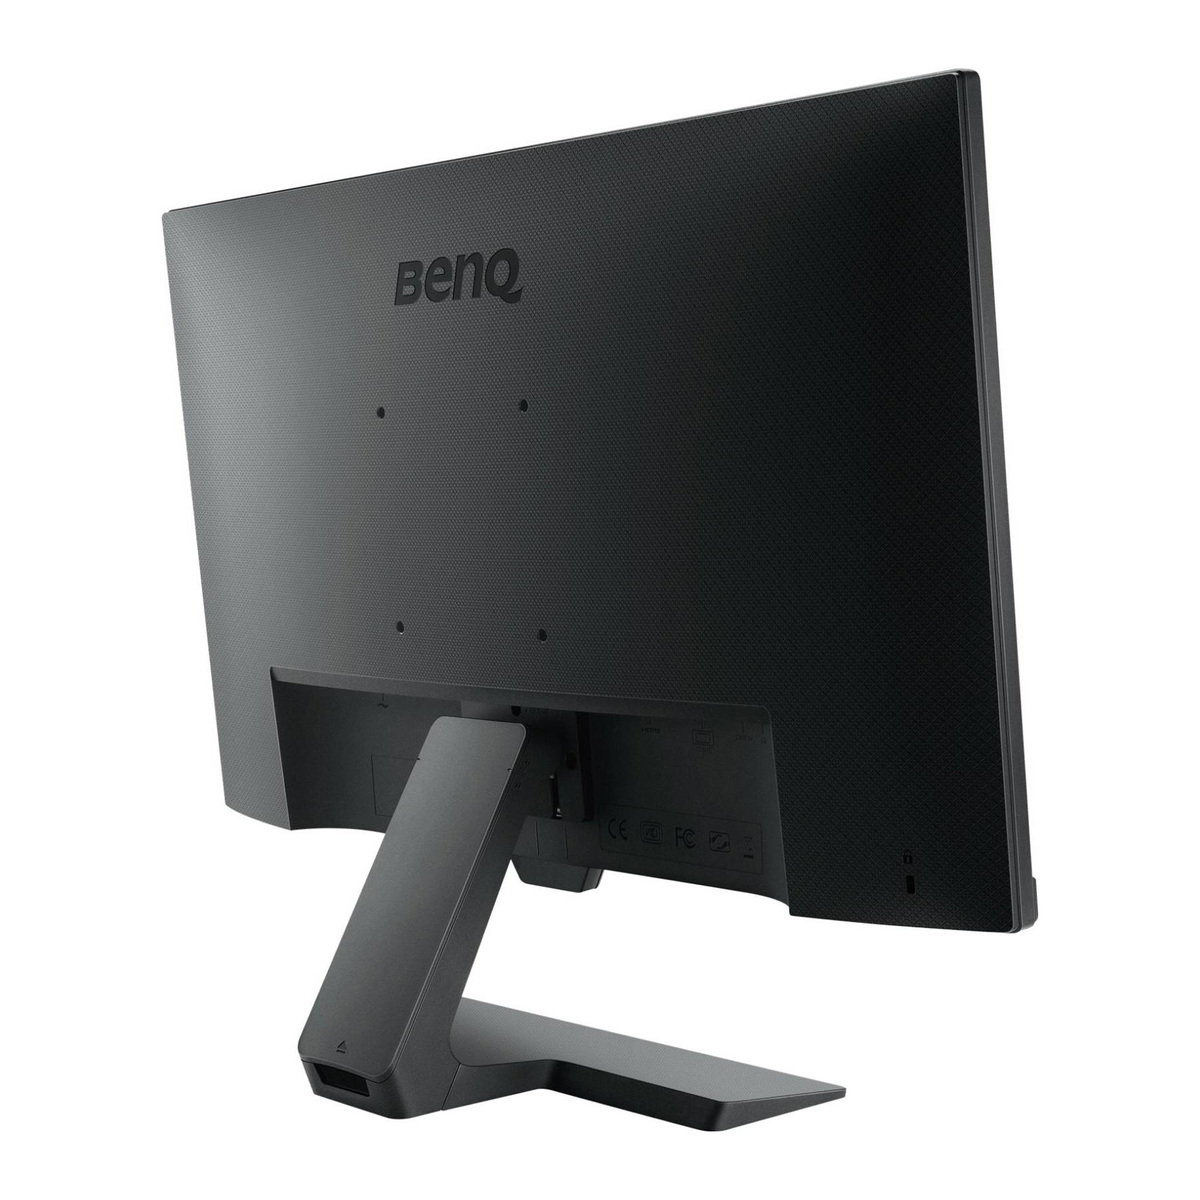 BenQ GW2480L 23.8" Eye-Care Stylish IPS Monitor, Full HD 1080p IPS 1920x1080 Display, Cable Management, Low Blue Light Plus, 60Hz Refresh Rate, 5 ms Response Time, Black